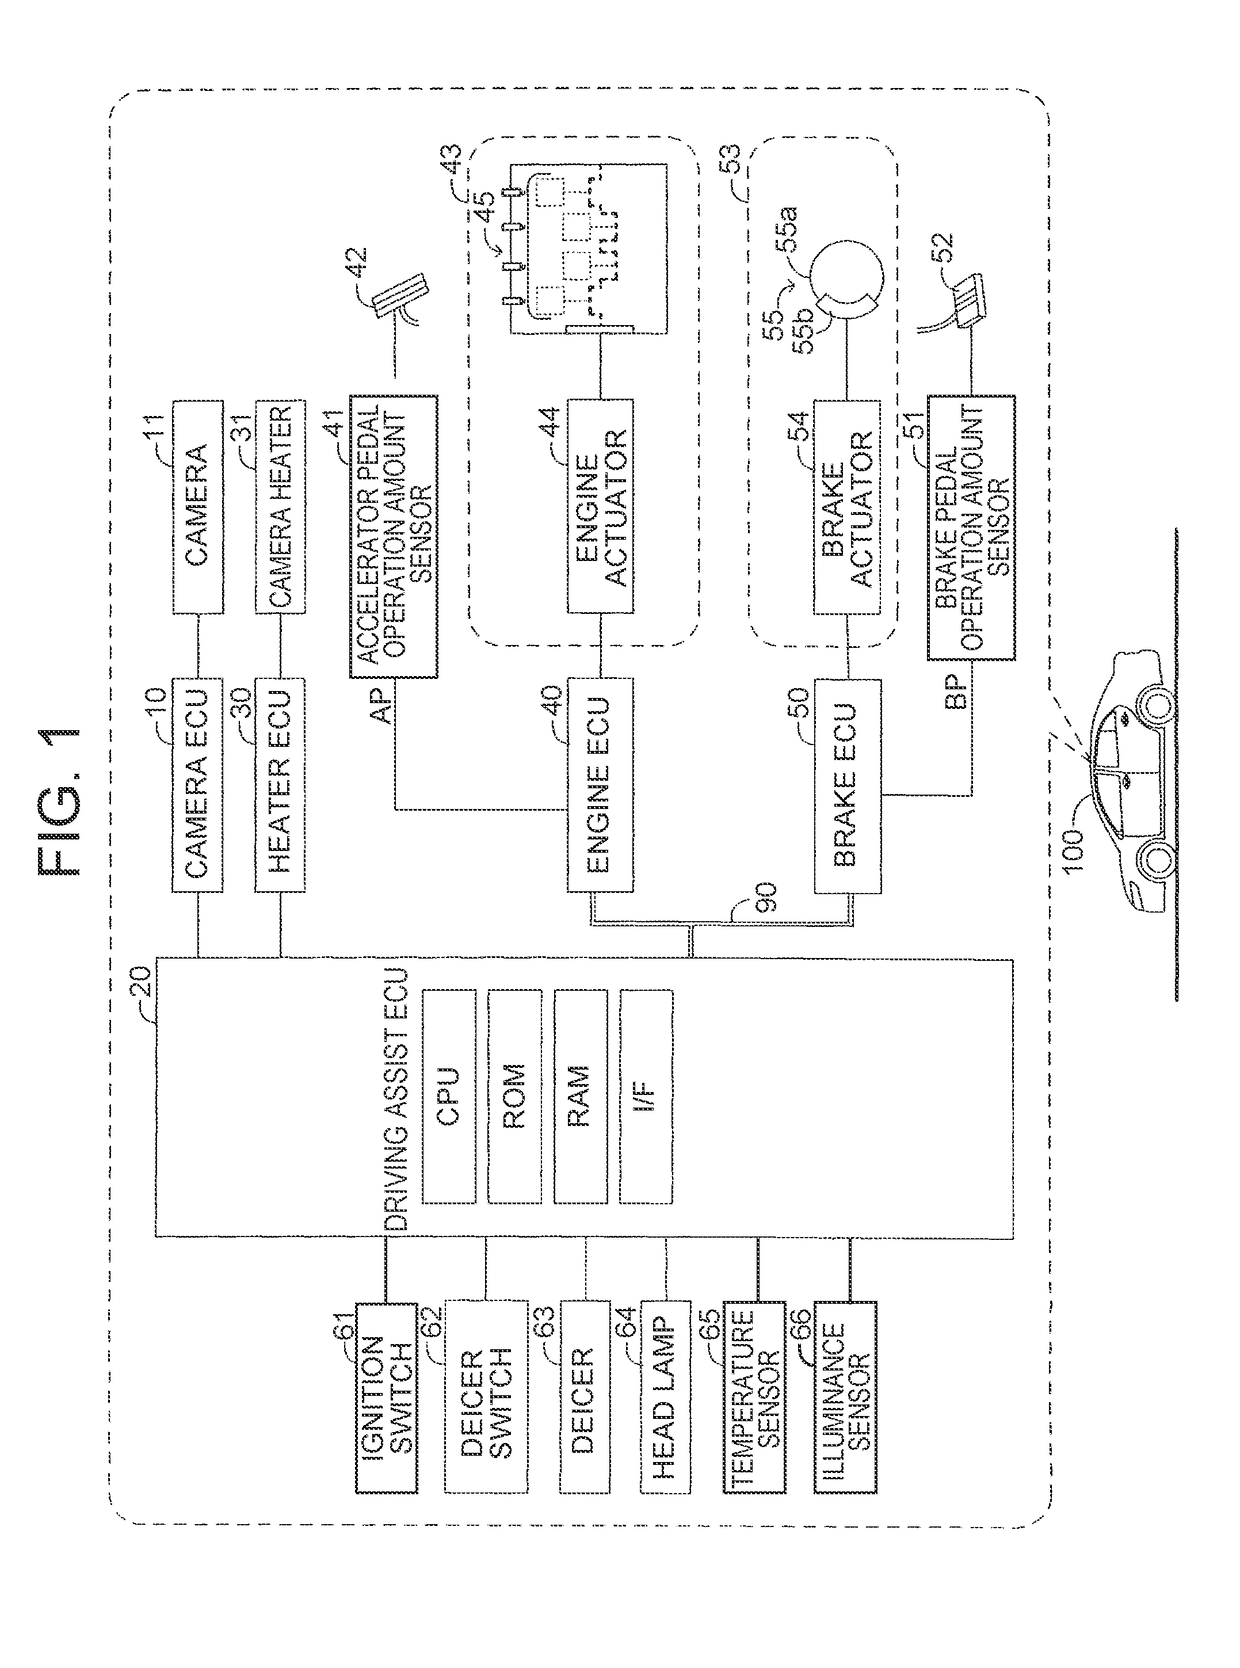 Control device for vehicle heater